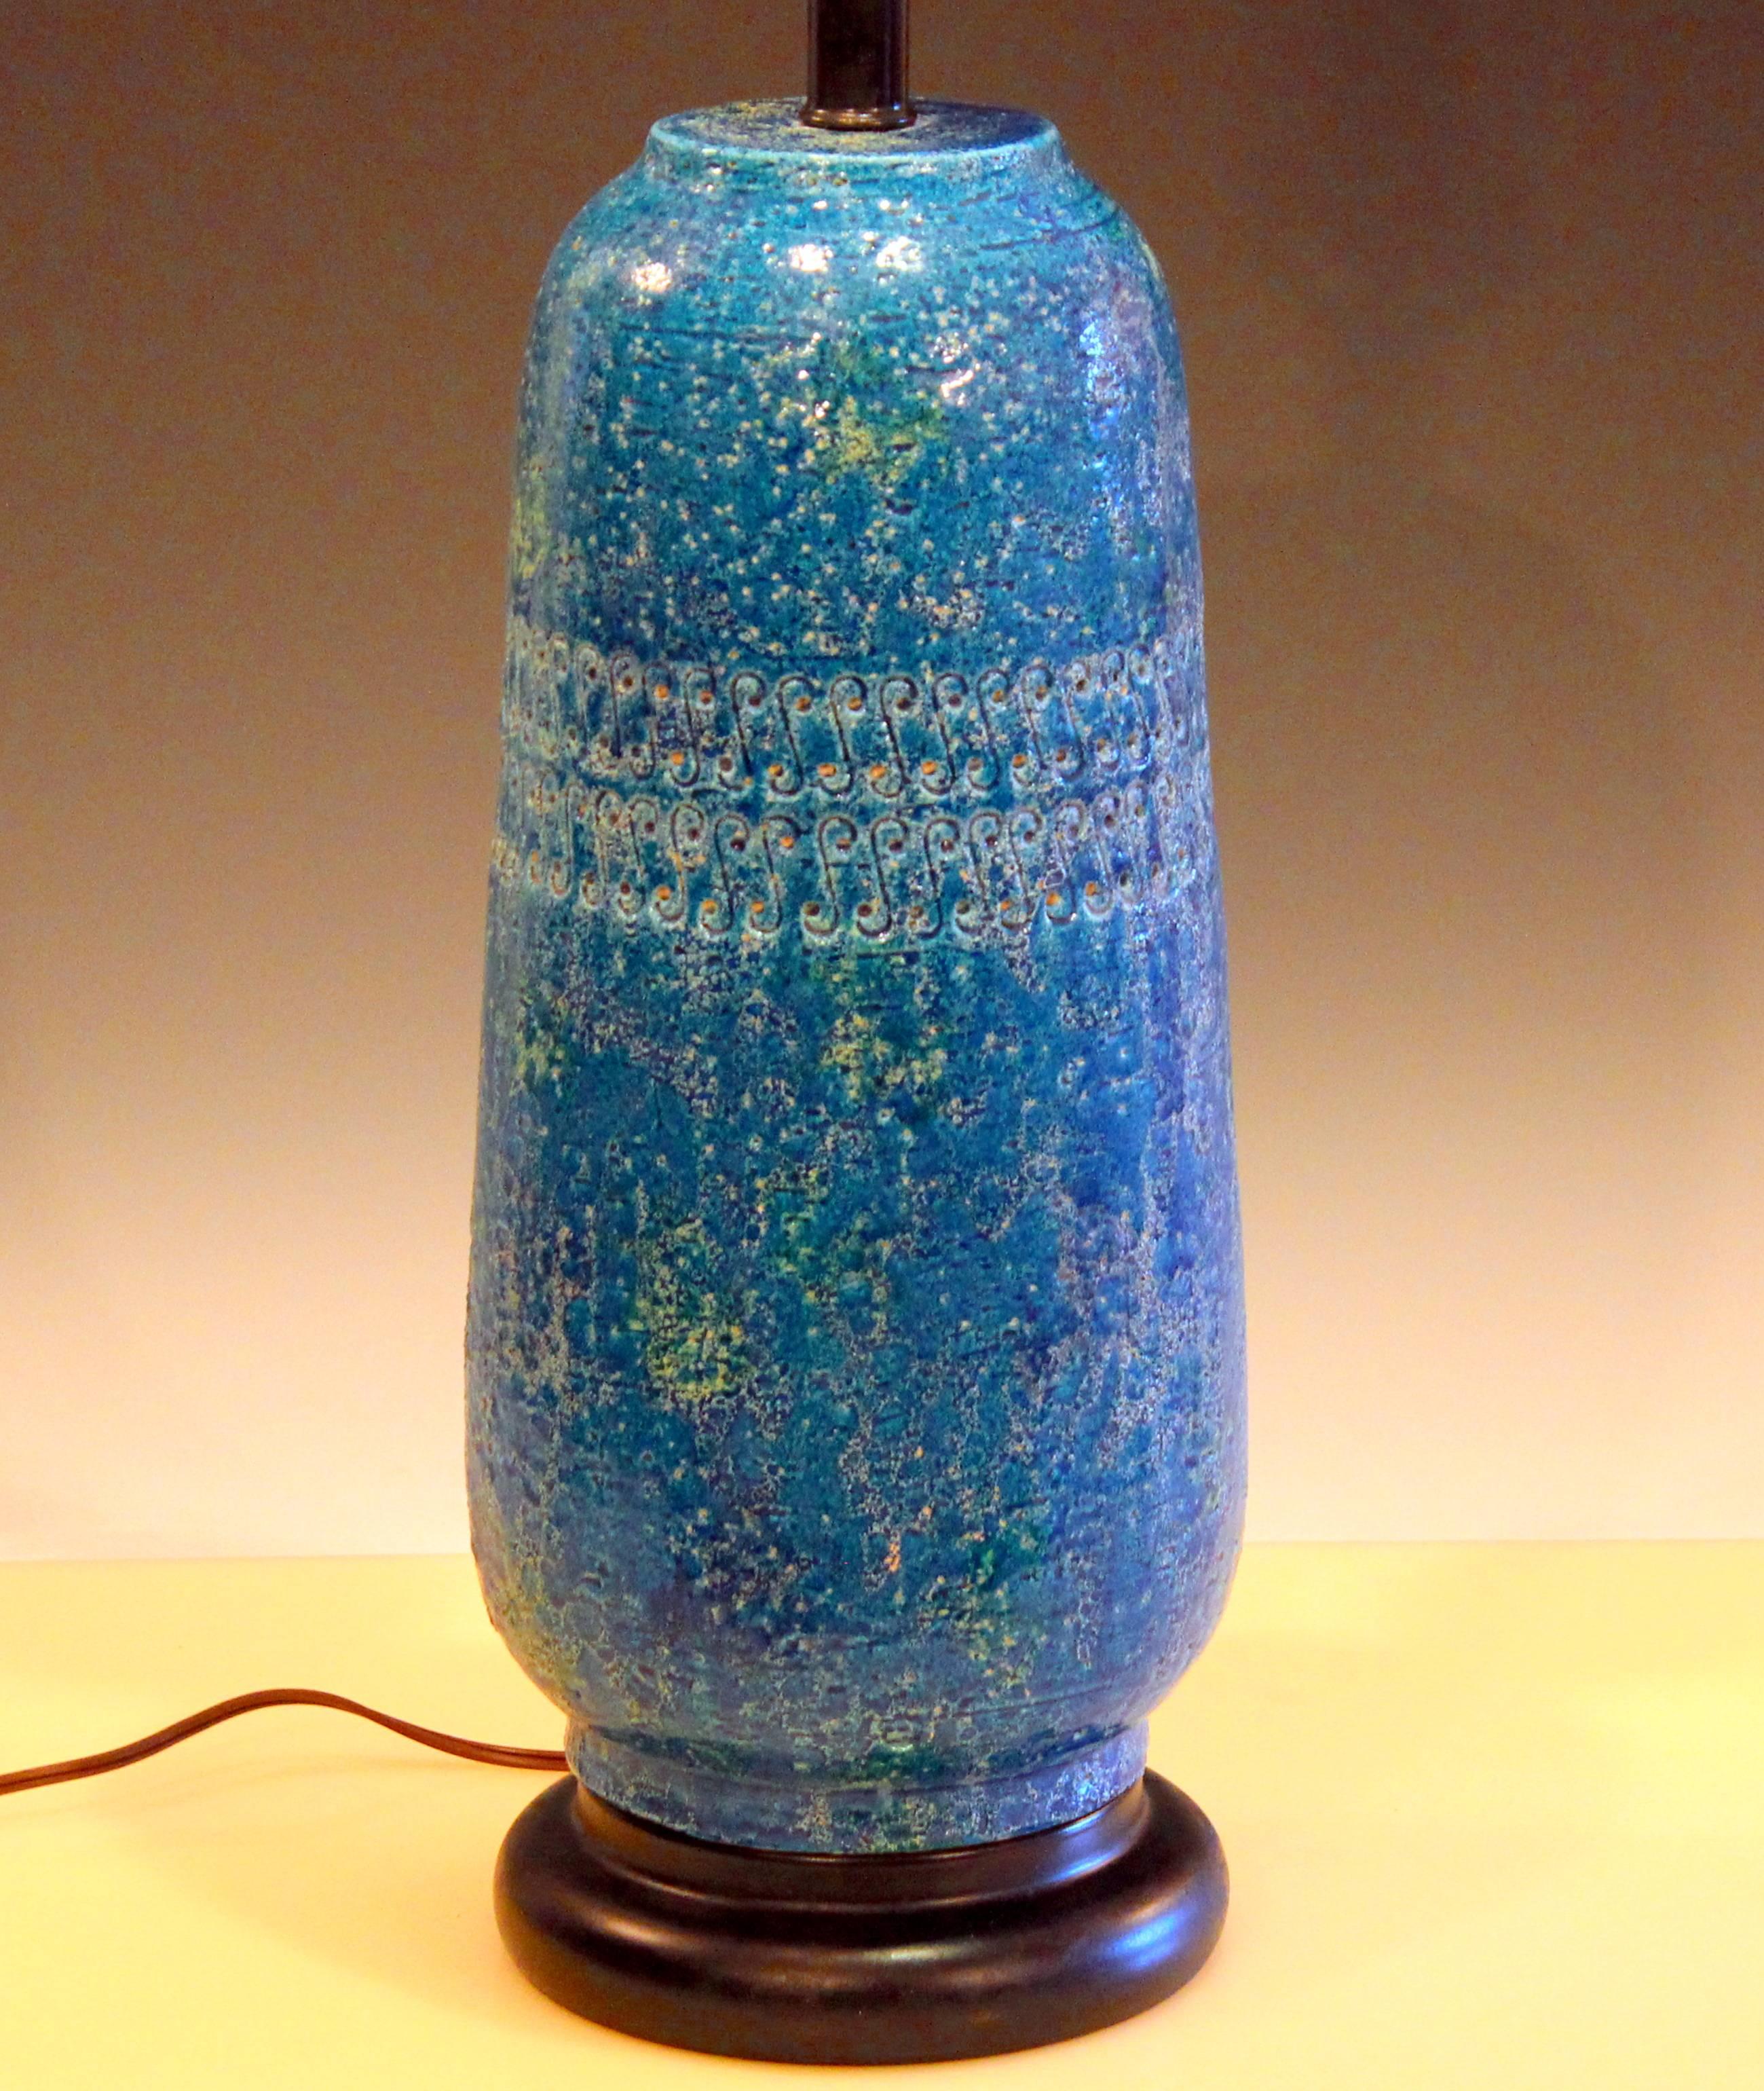 Great Bitossi pottery lamp in Rimini blue Chinese glaze with impressed design around shoulder. The textured and variegated glaze gives the appearance of a deeply saturated color. Measures: 29